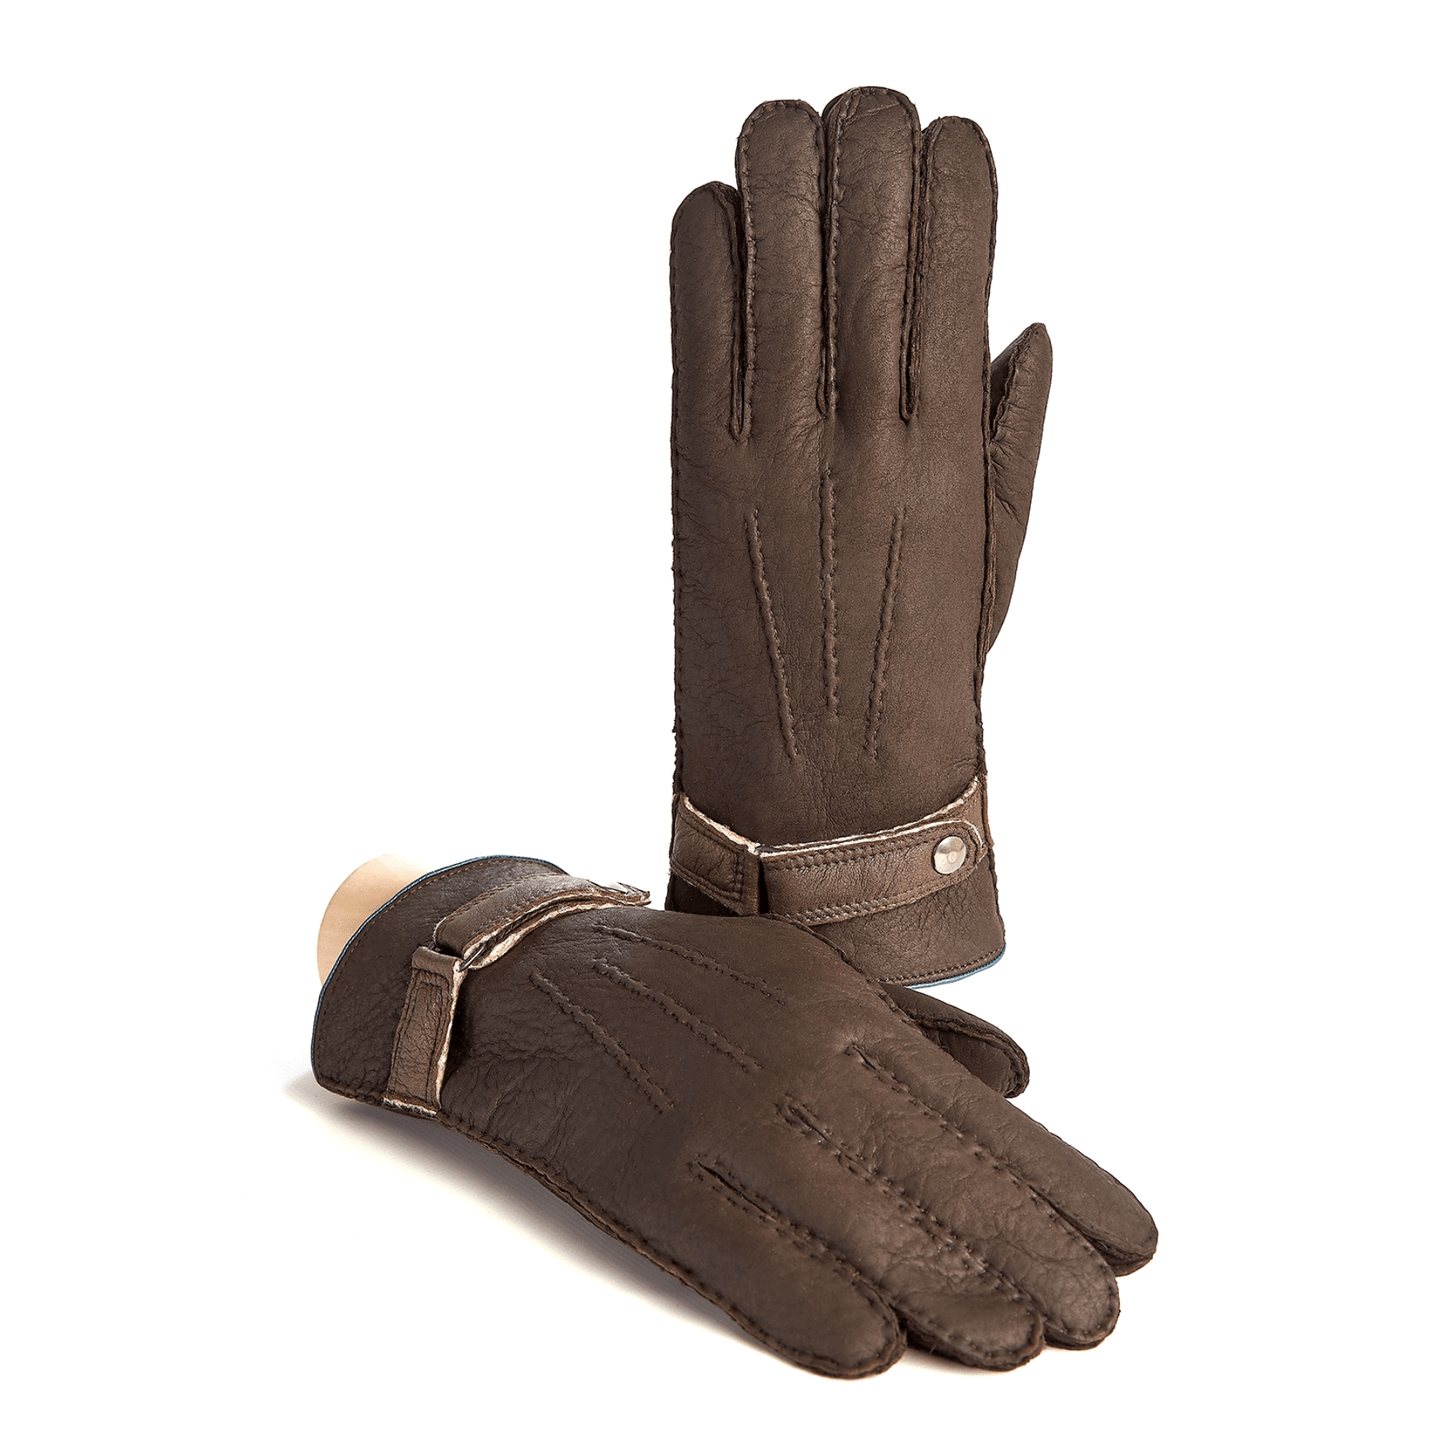 Men's curly lambskin gloves in brown color with metallic lambskin strap details